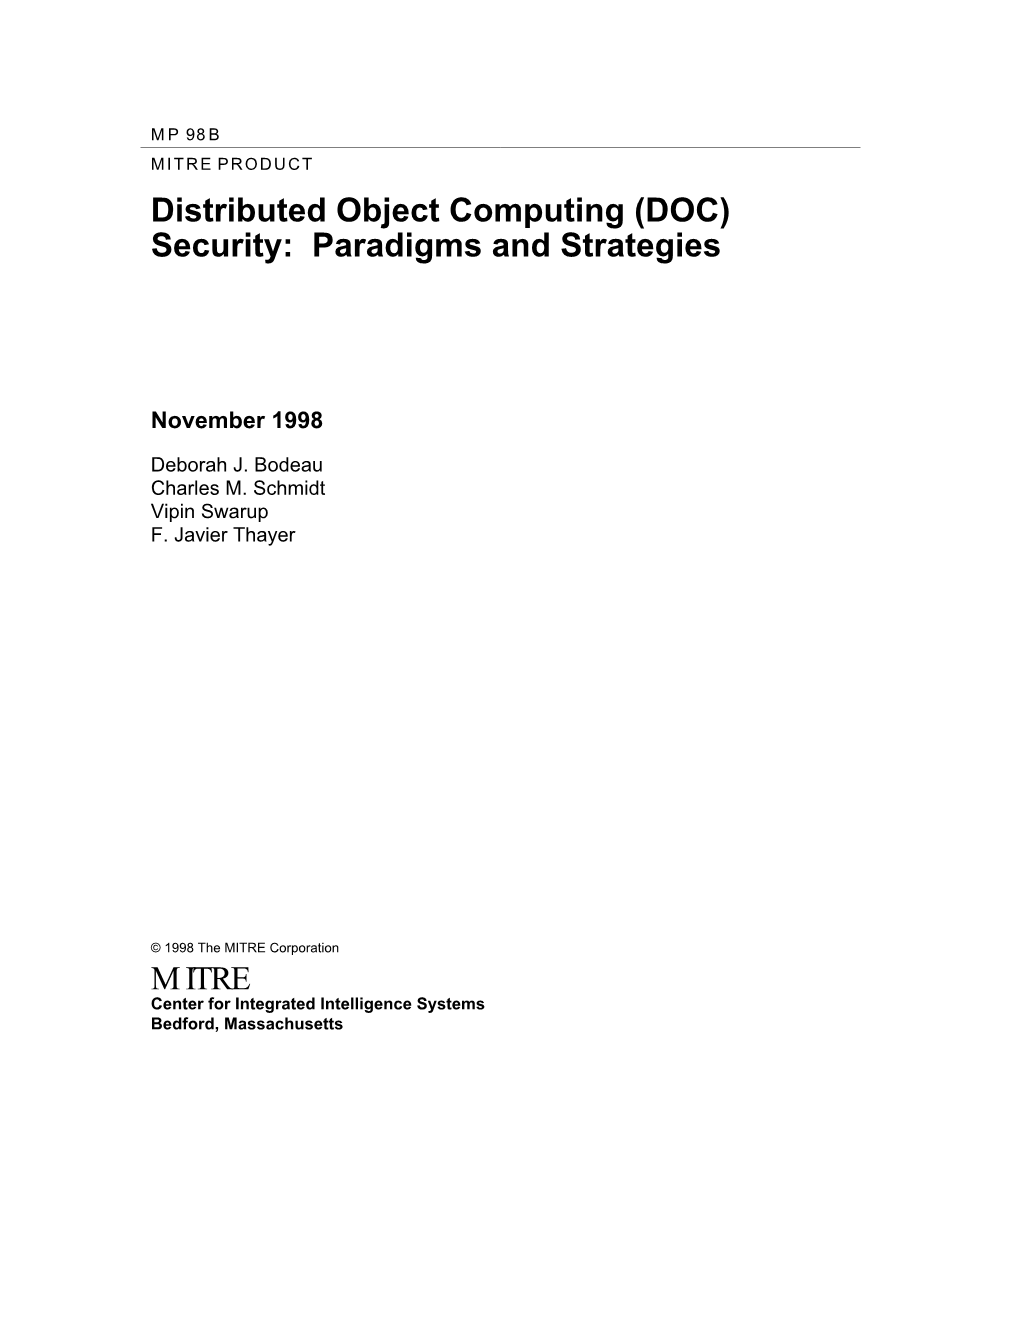 Distributed Object Computing (DOC) Security: Paradigms and Strategies